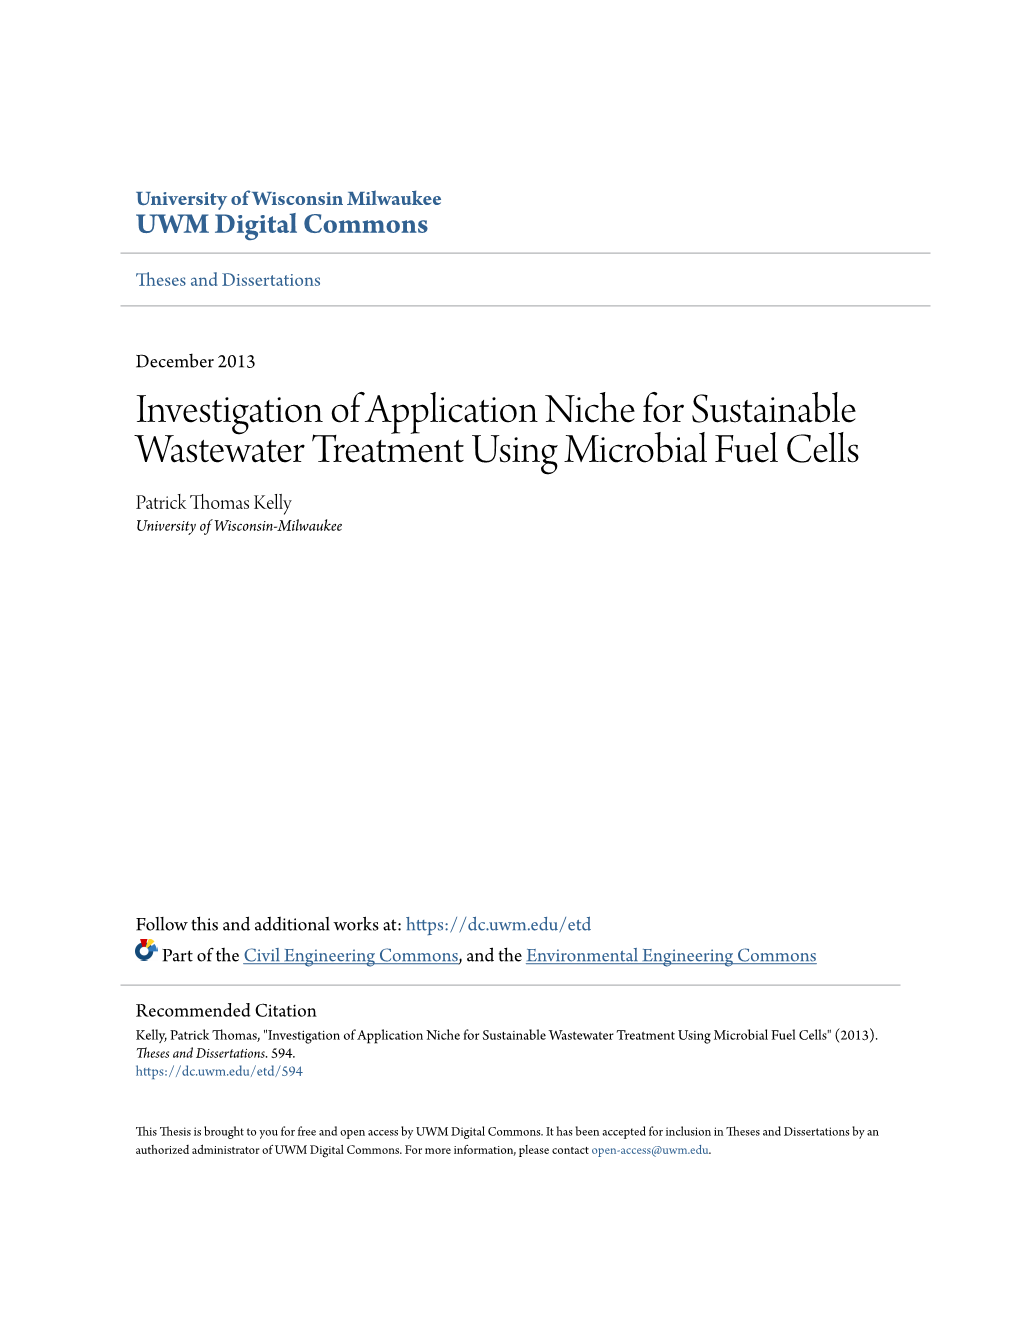 Investigation of Application Niche for Sustainable Wastewater Treatment Using Microbial Fuel Cells Patrick Thomas Kelly University of Wisconsin-Milwaukee